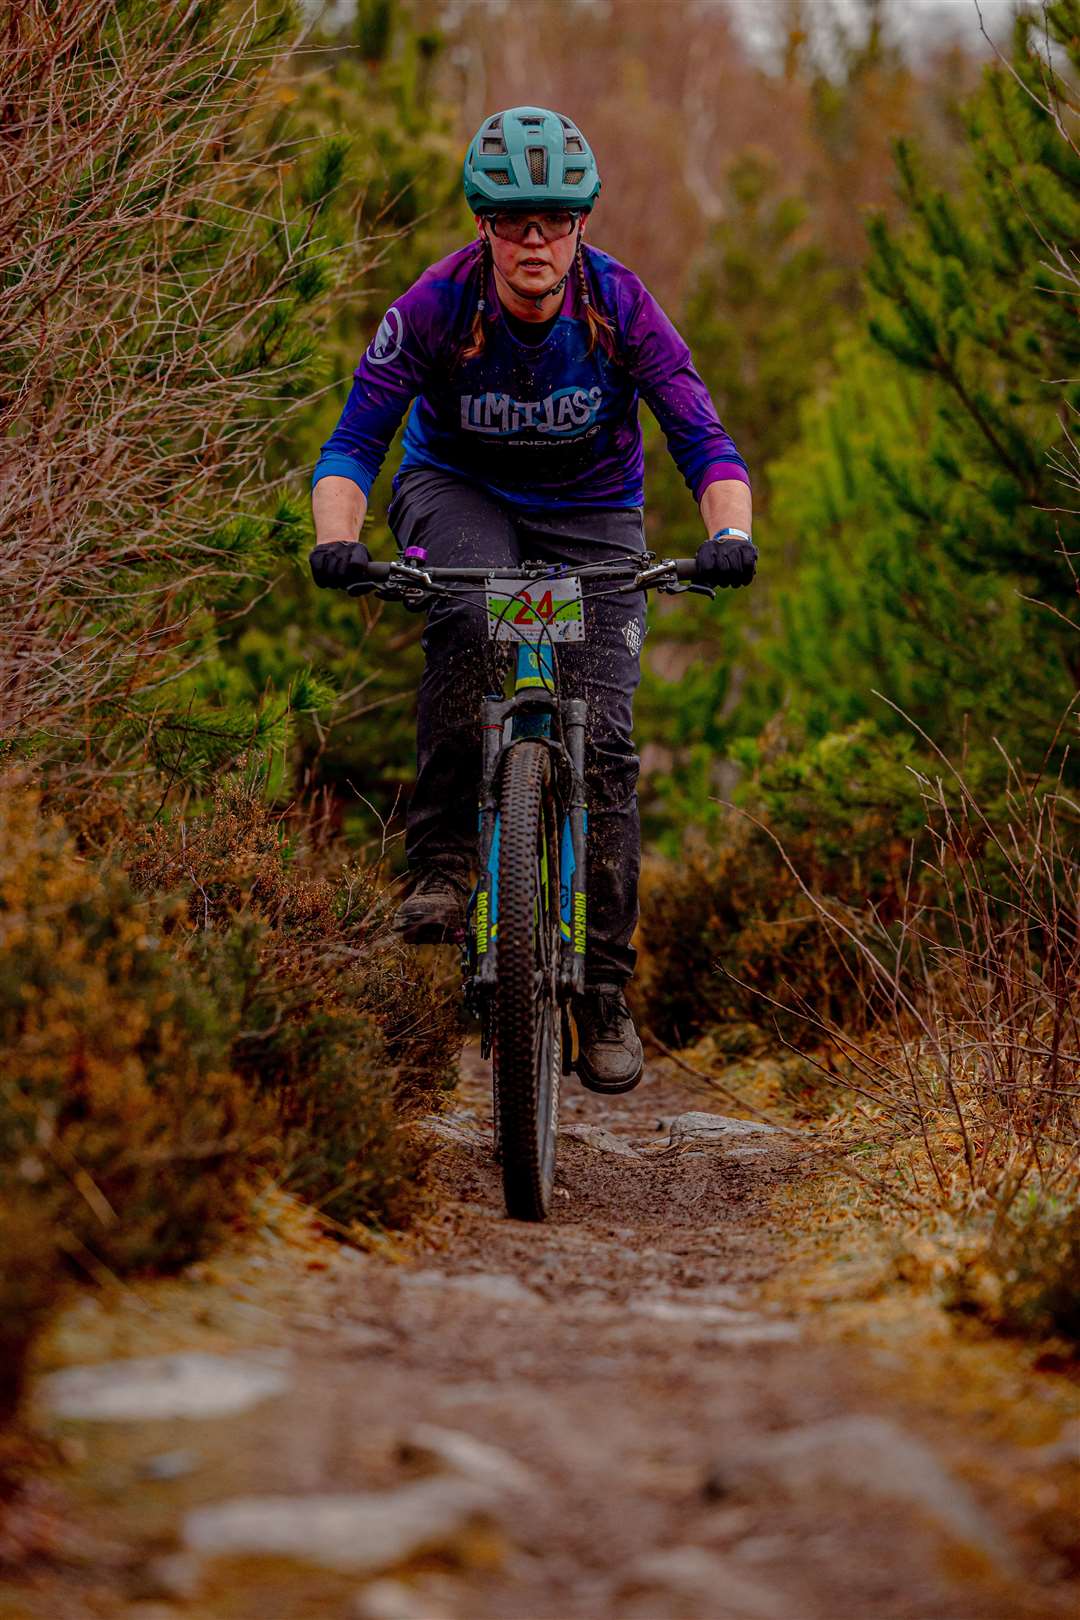 Jane concentrates on the narrow trail during one of her 11 laps. Picture: Digital Downhill